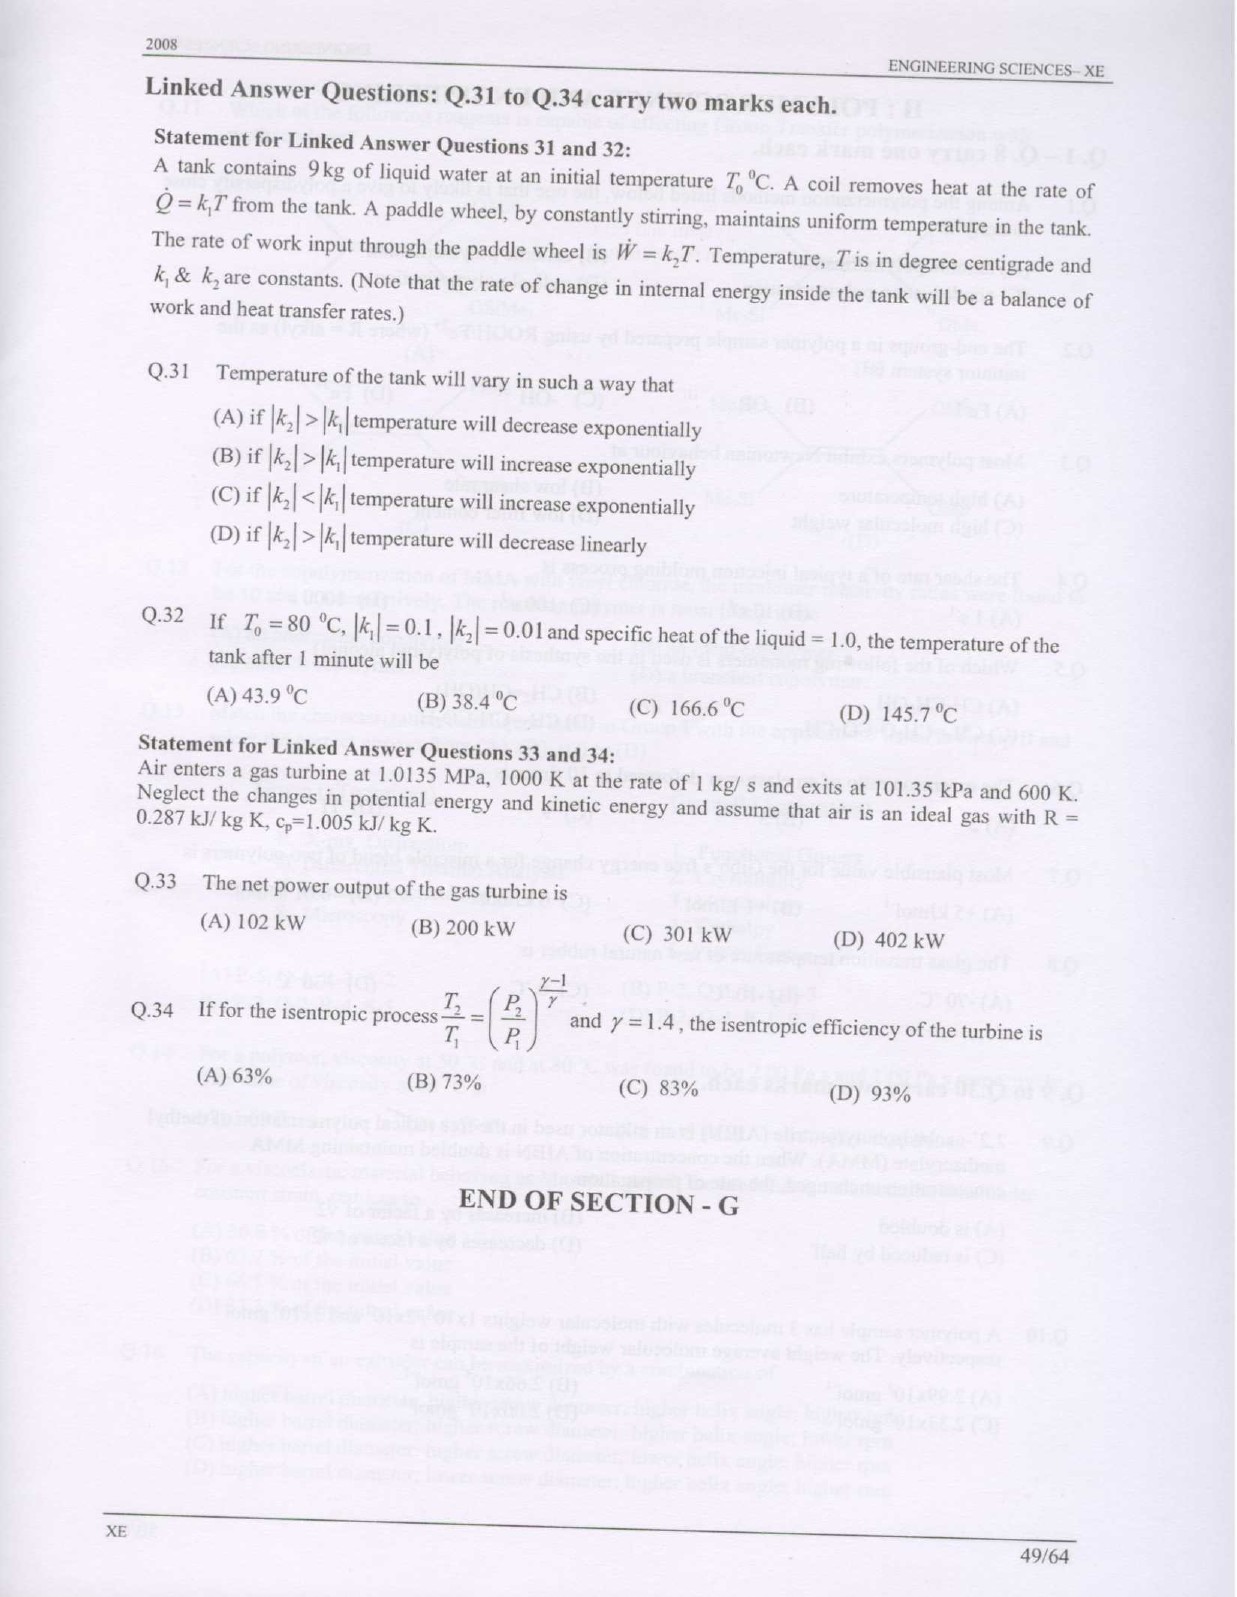 GATE Exam Question Paper 2008 Engineering Sciences 49